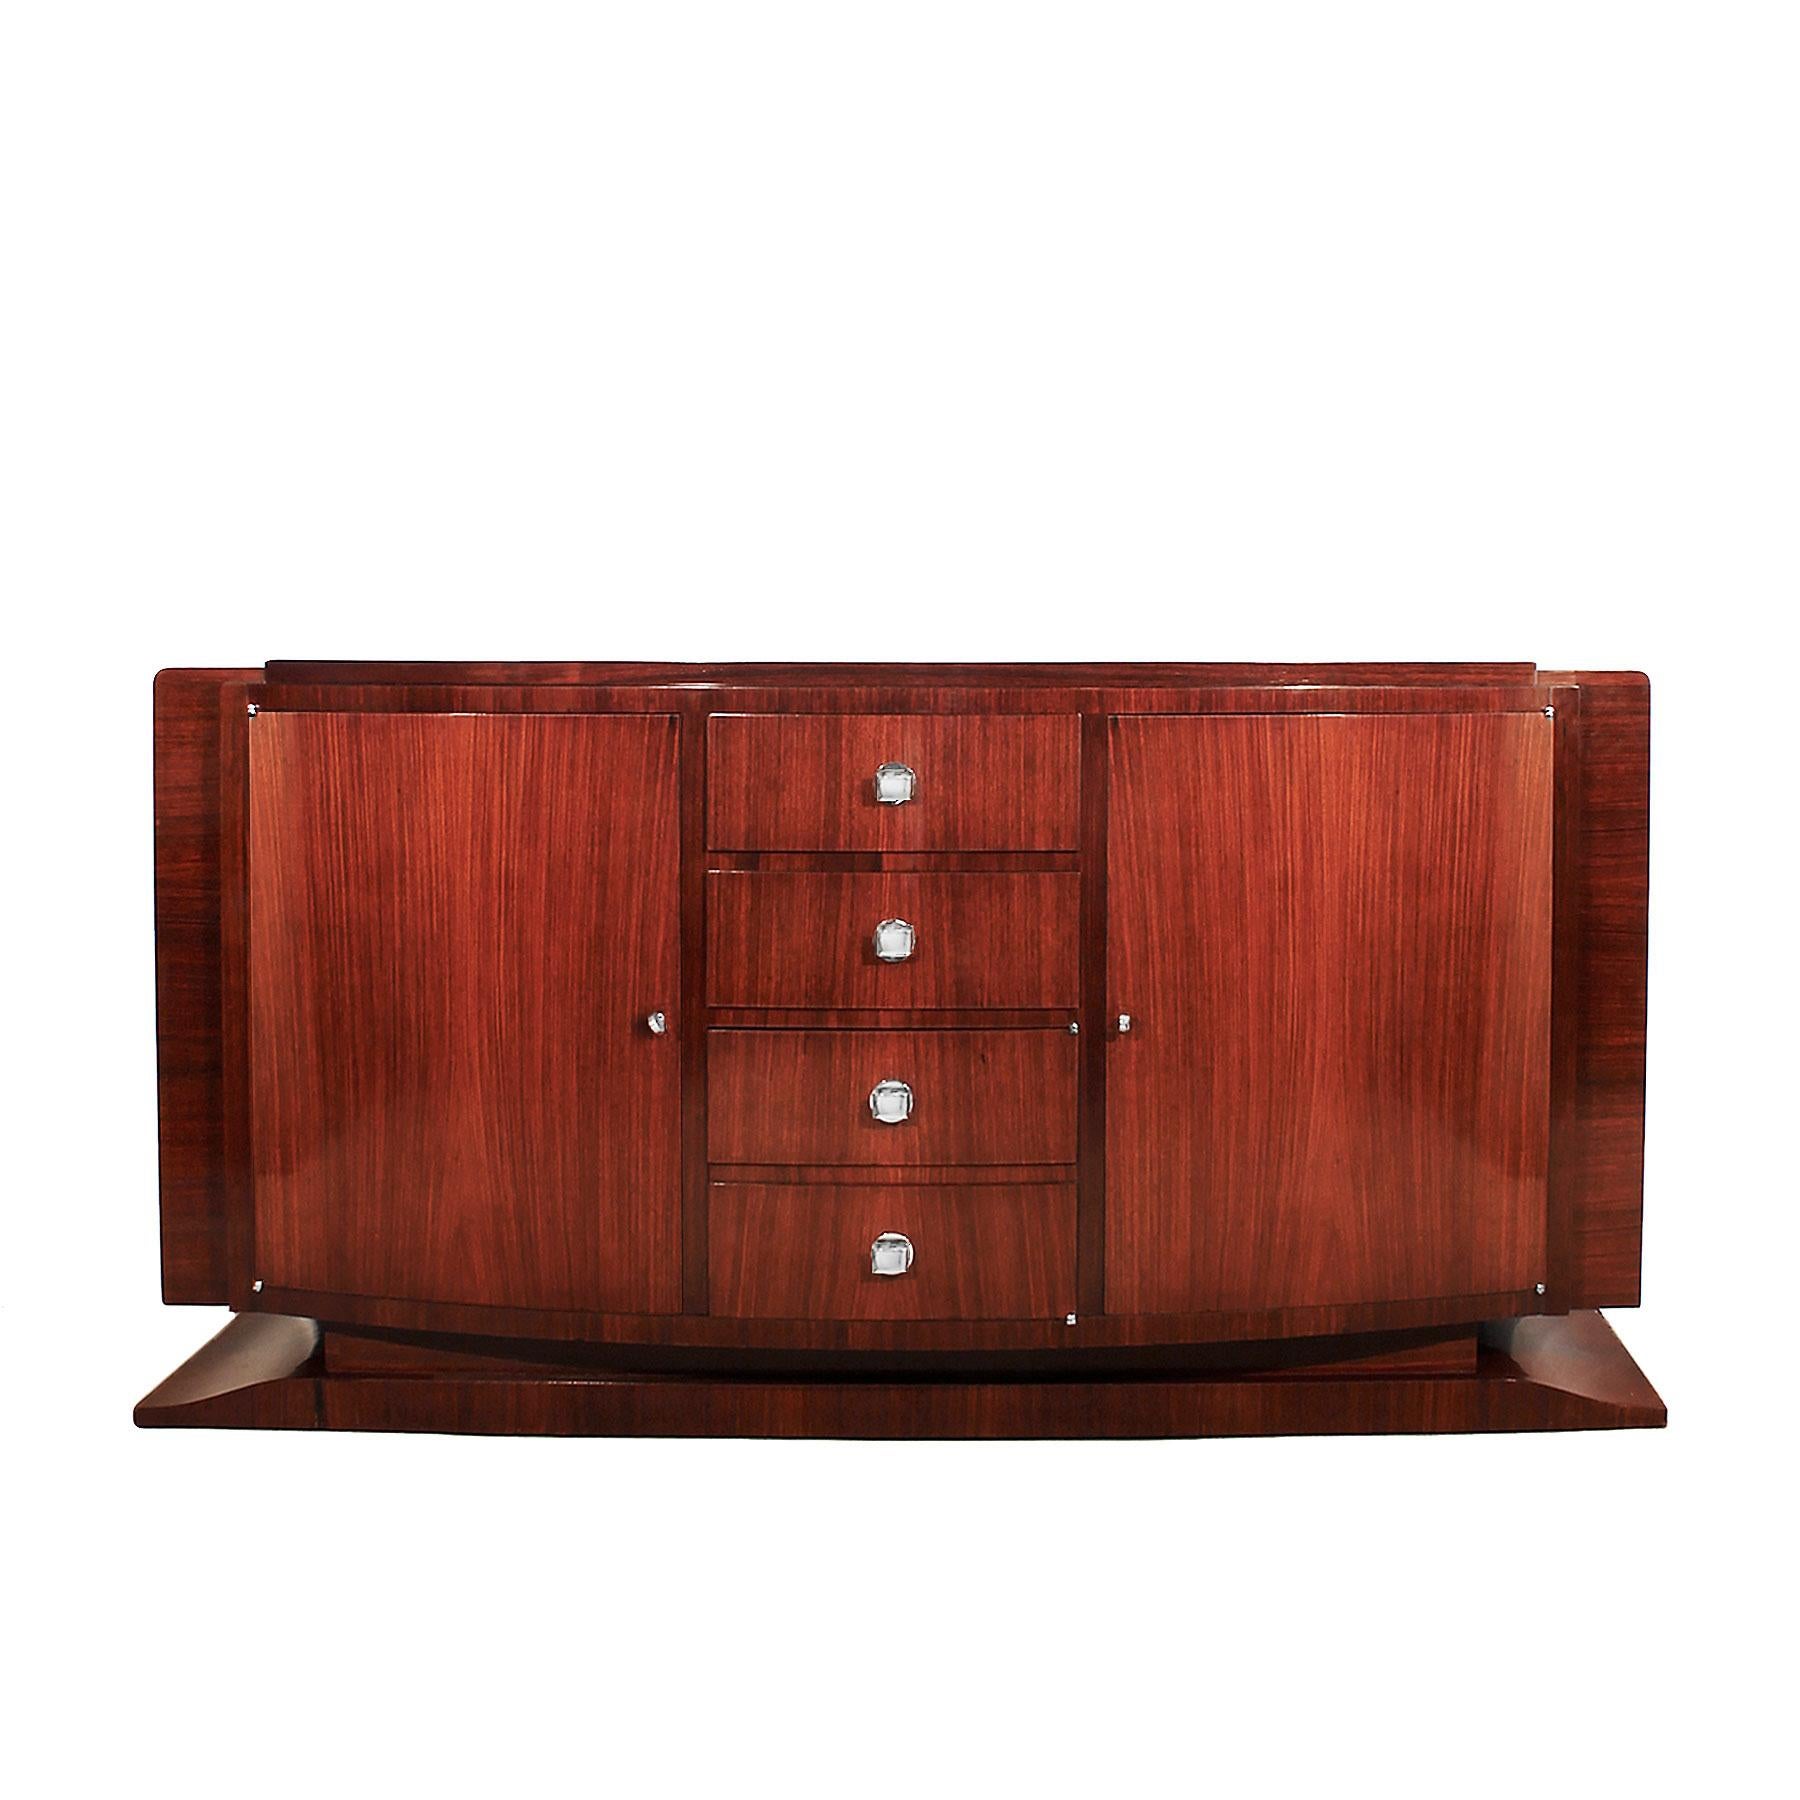 Art Deco sideboard, solid mahogany and mahogany veneer, French polish, two drawers and a false drawers door at the bottom, two side doors with shelves, nickel-plated bronze hardware,

France, circa 1930.